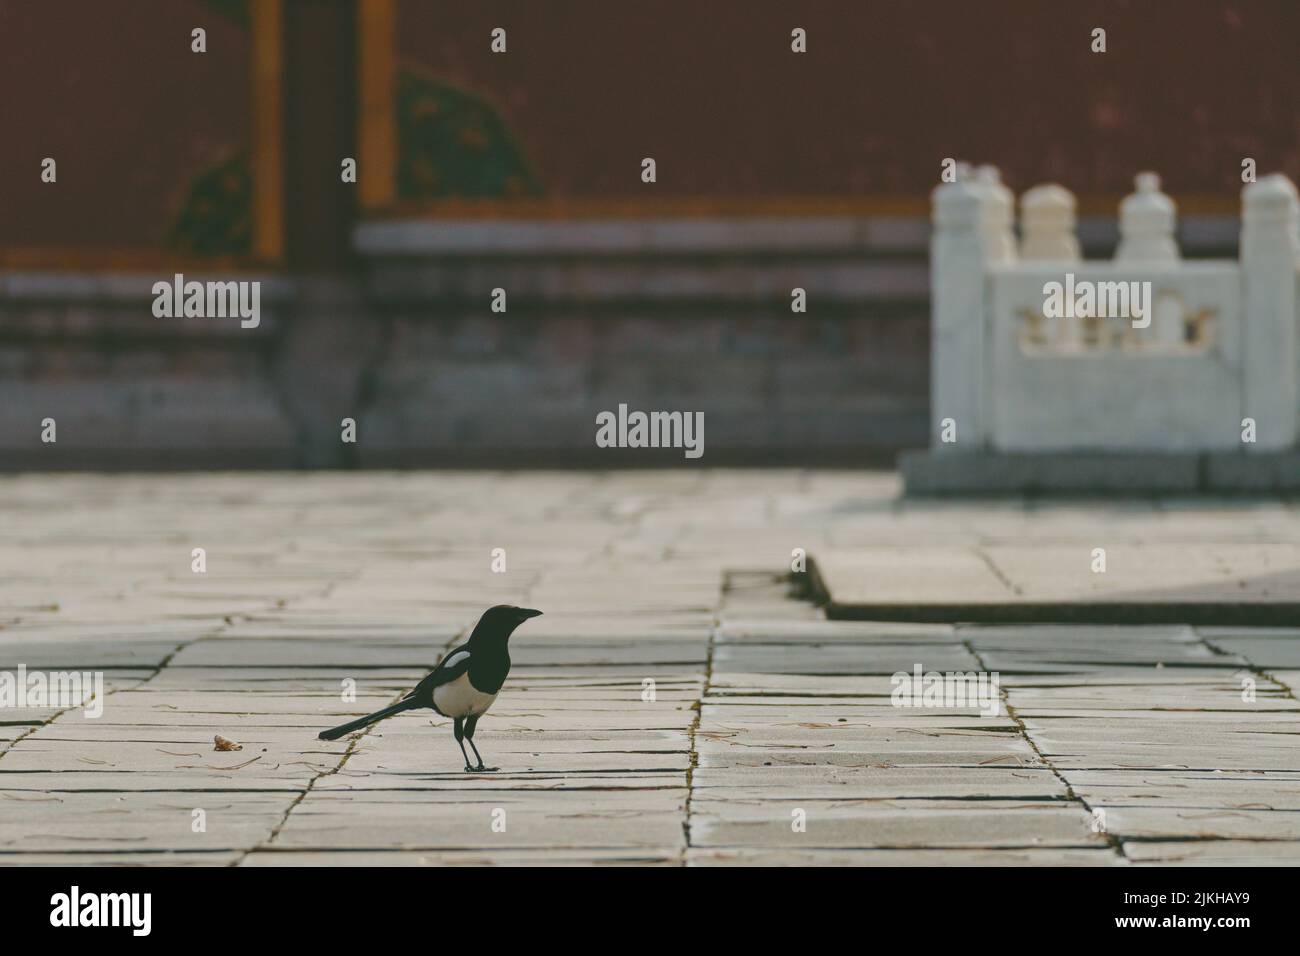 A view of a crow on the ground in a square Stock Photo